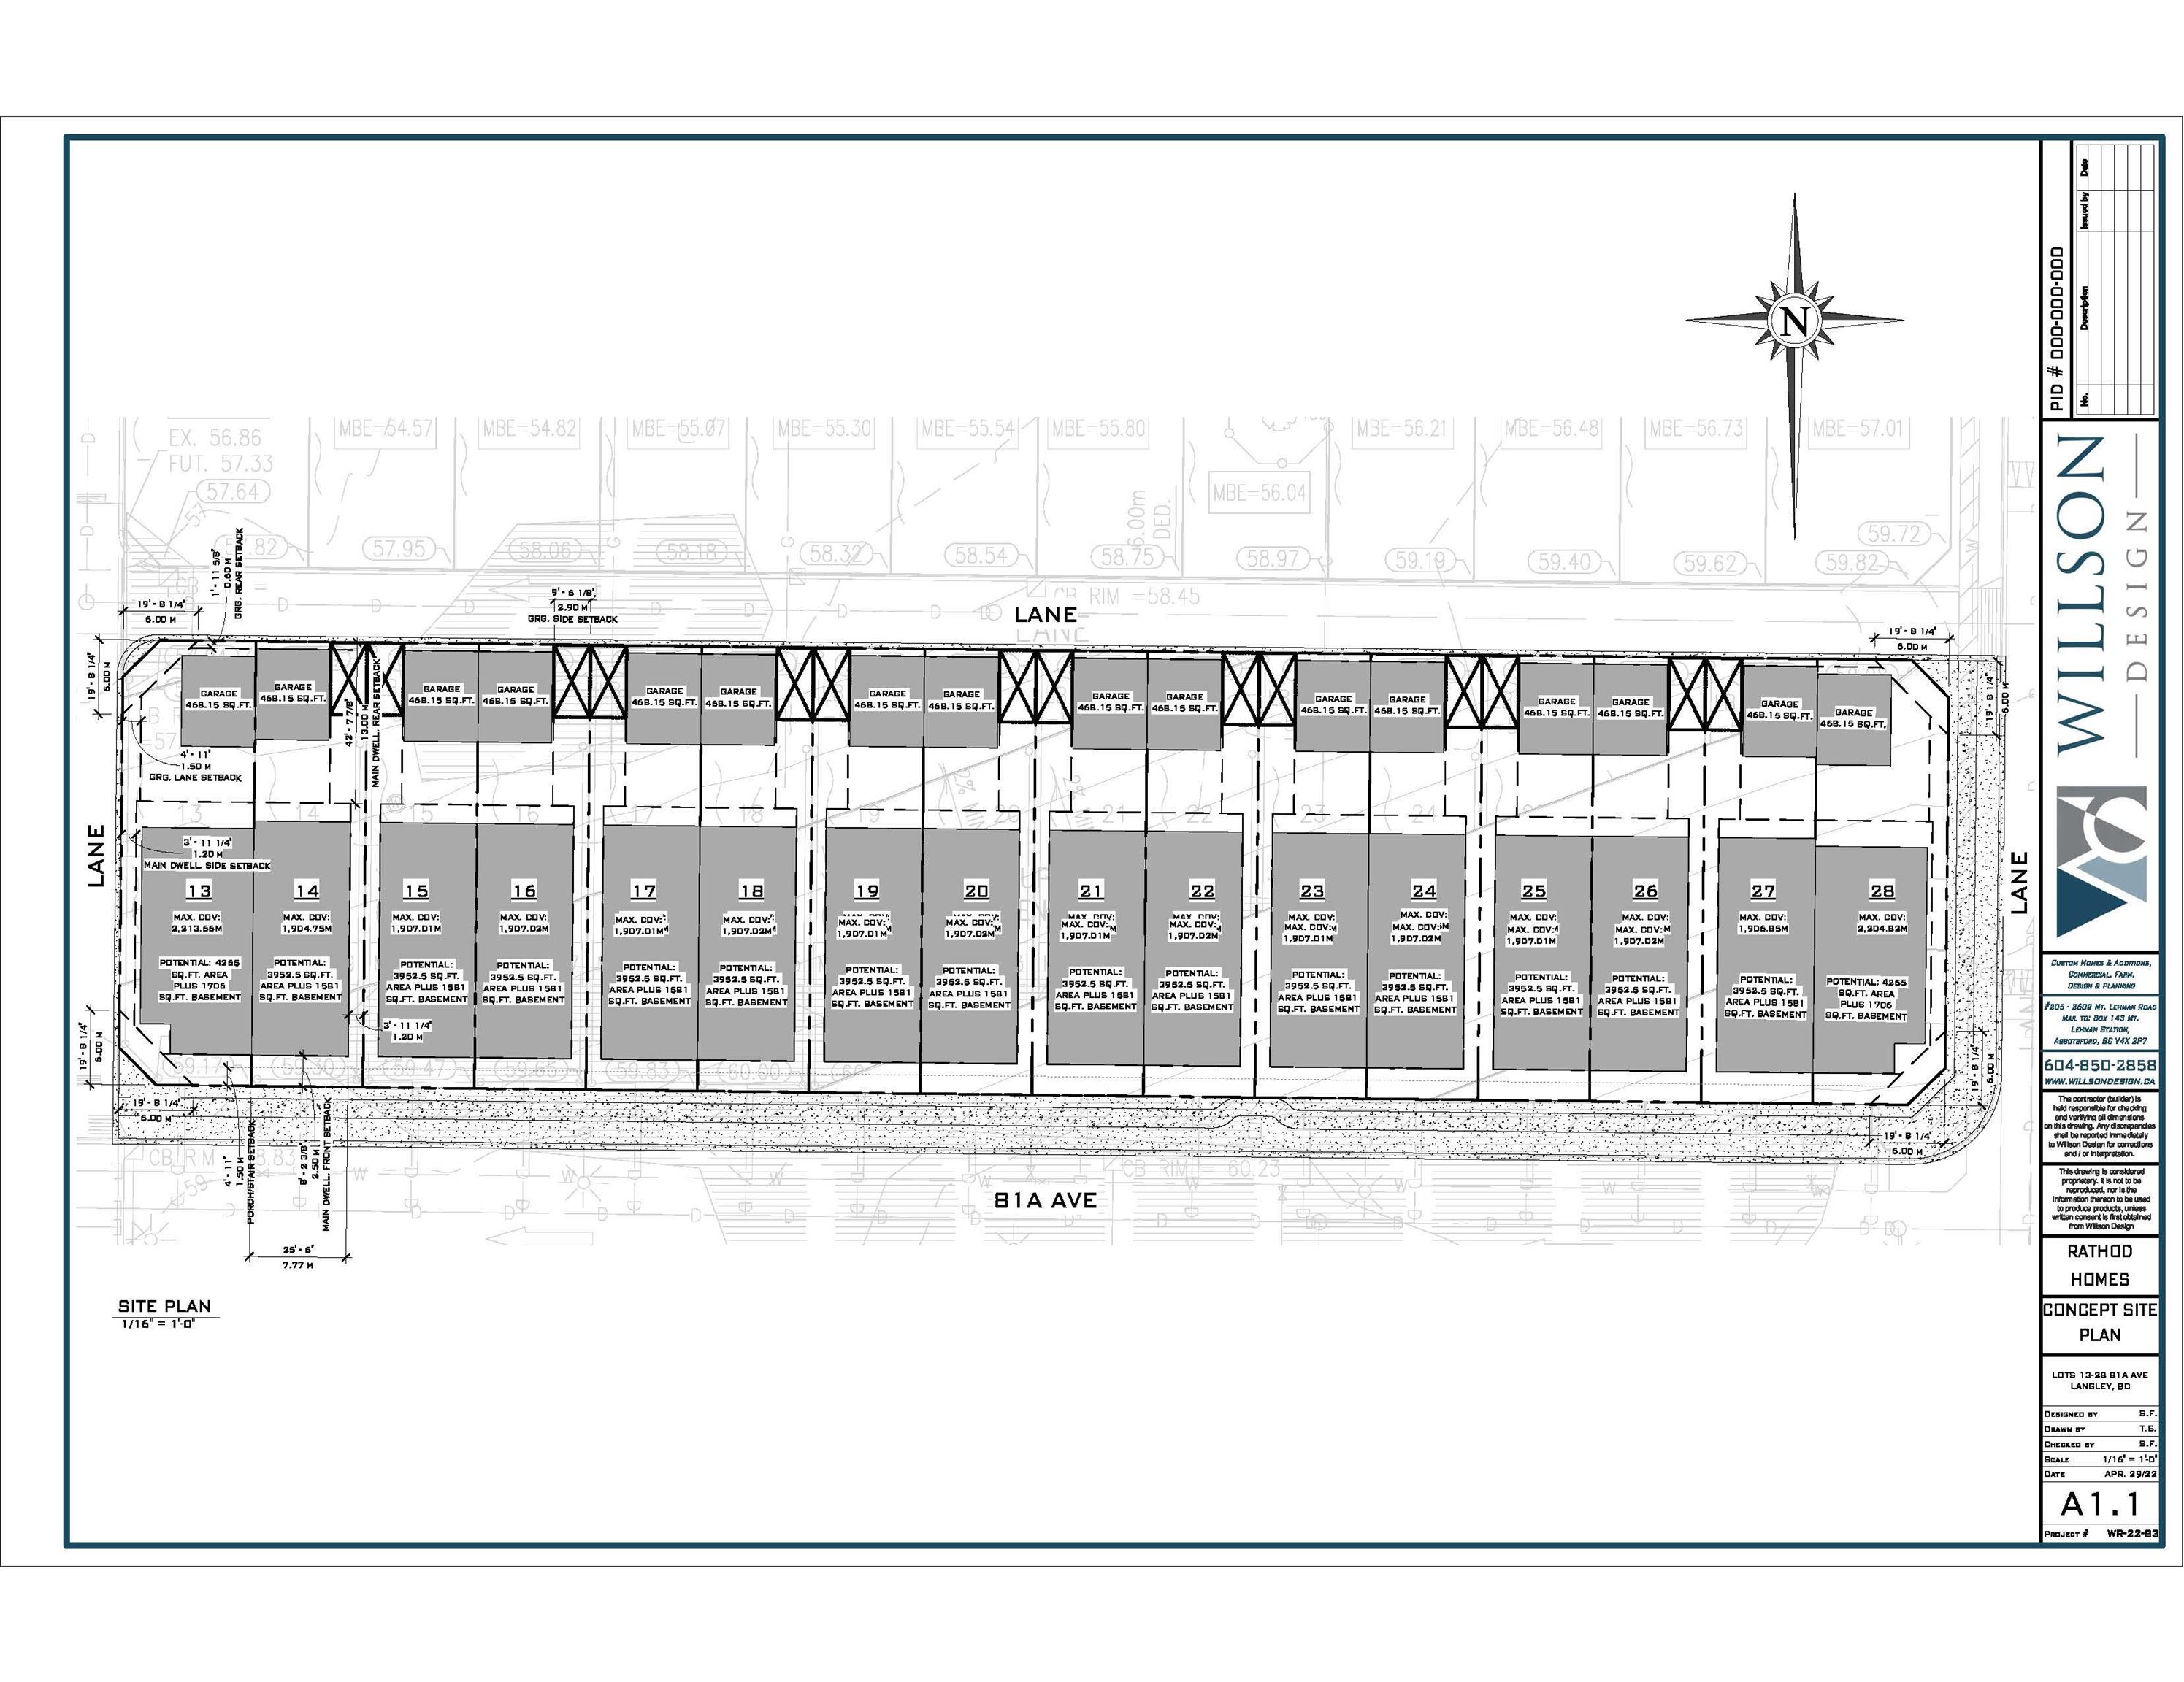 Site Plan with lot numbers